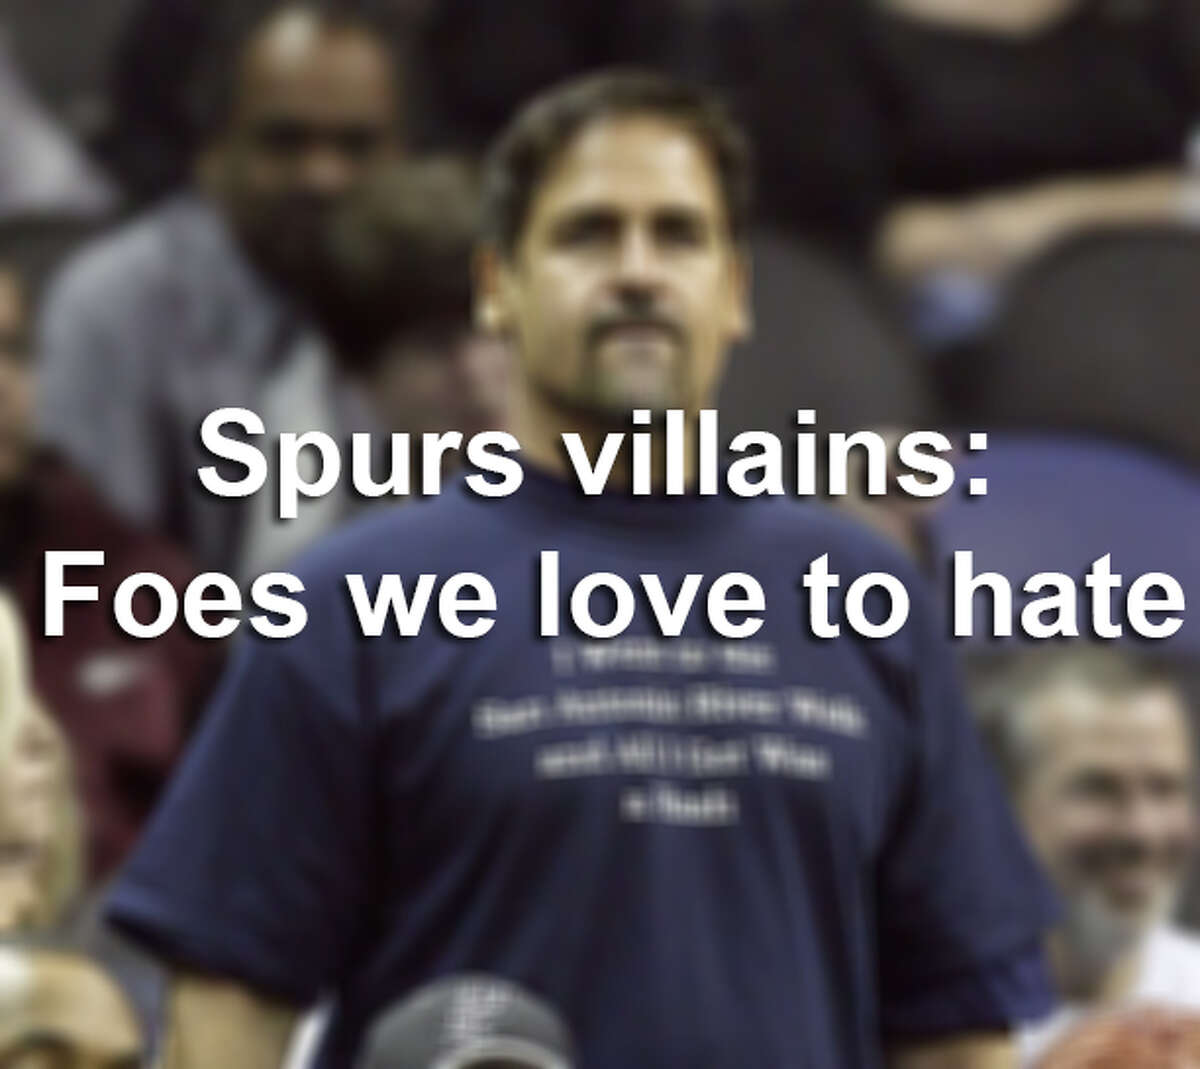 Spurs villains: Foes we love to hate.